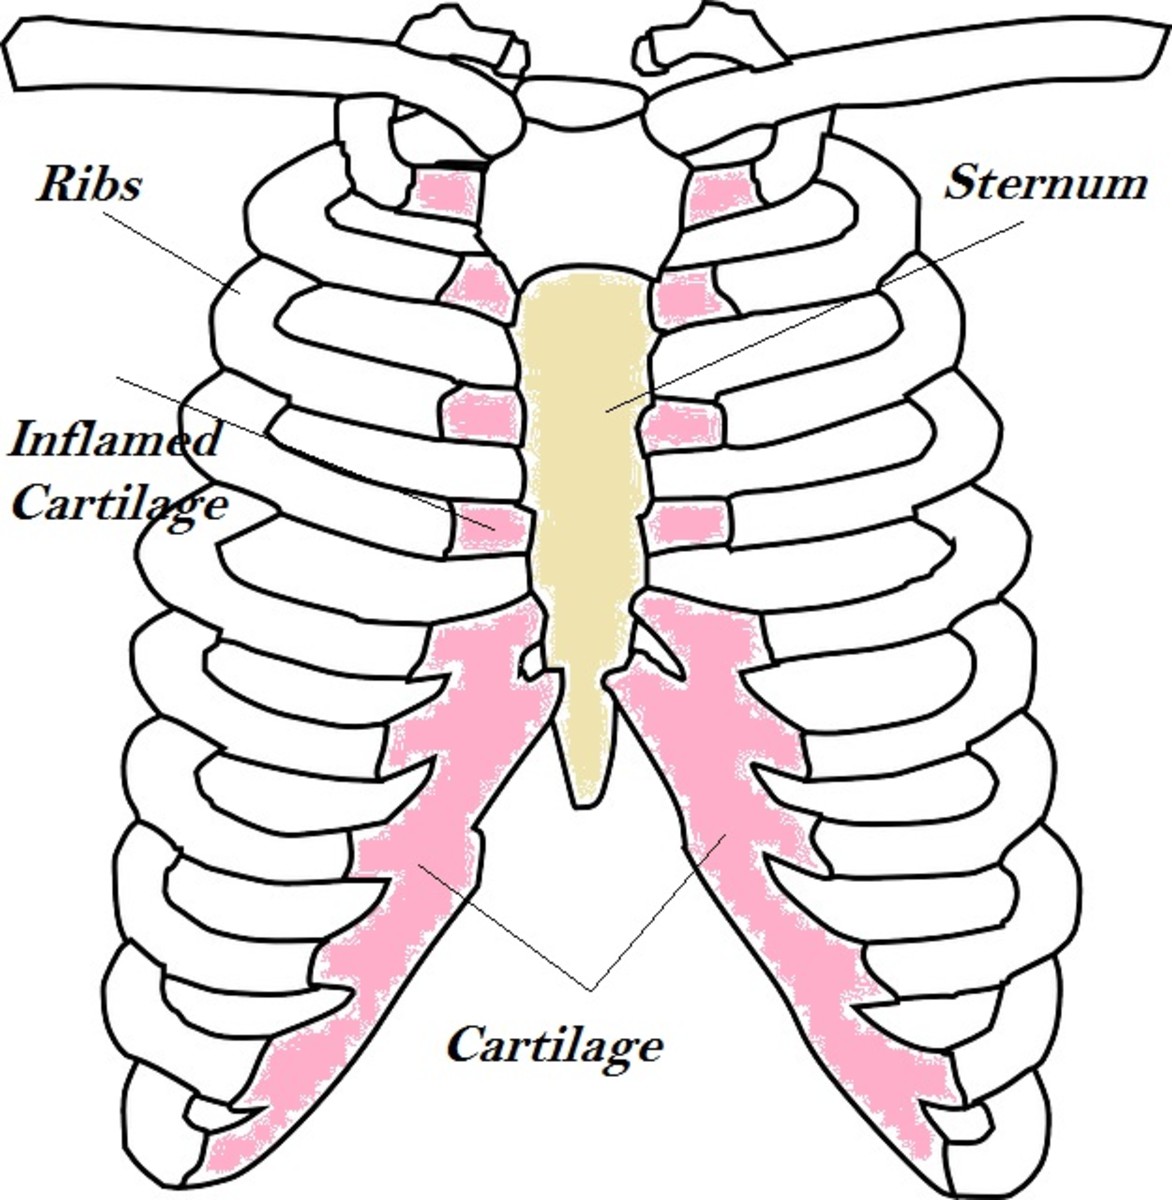 The inflamed cartilage puts pressure on the chest, which causes pain.